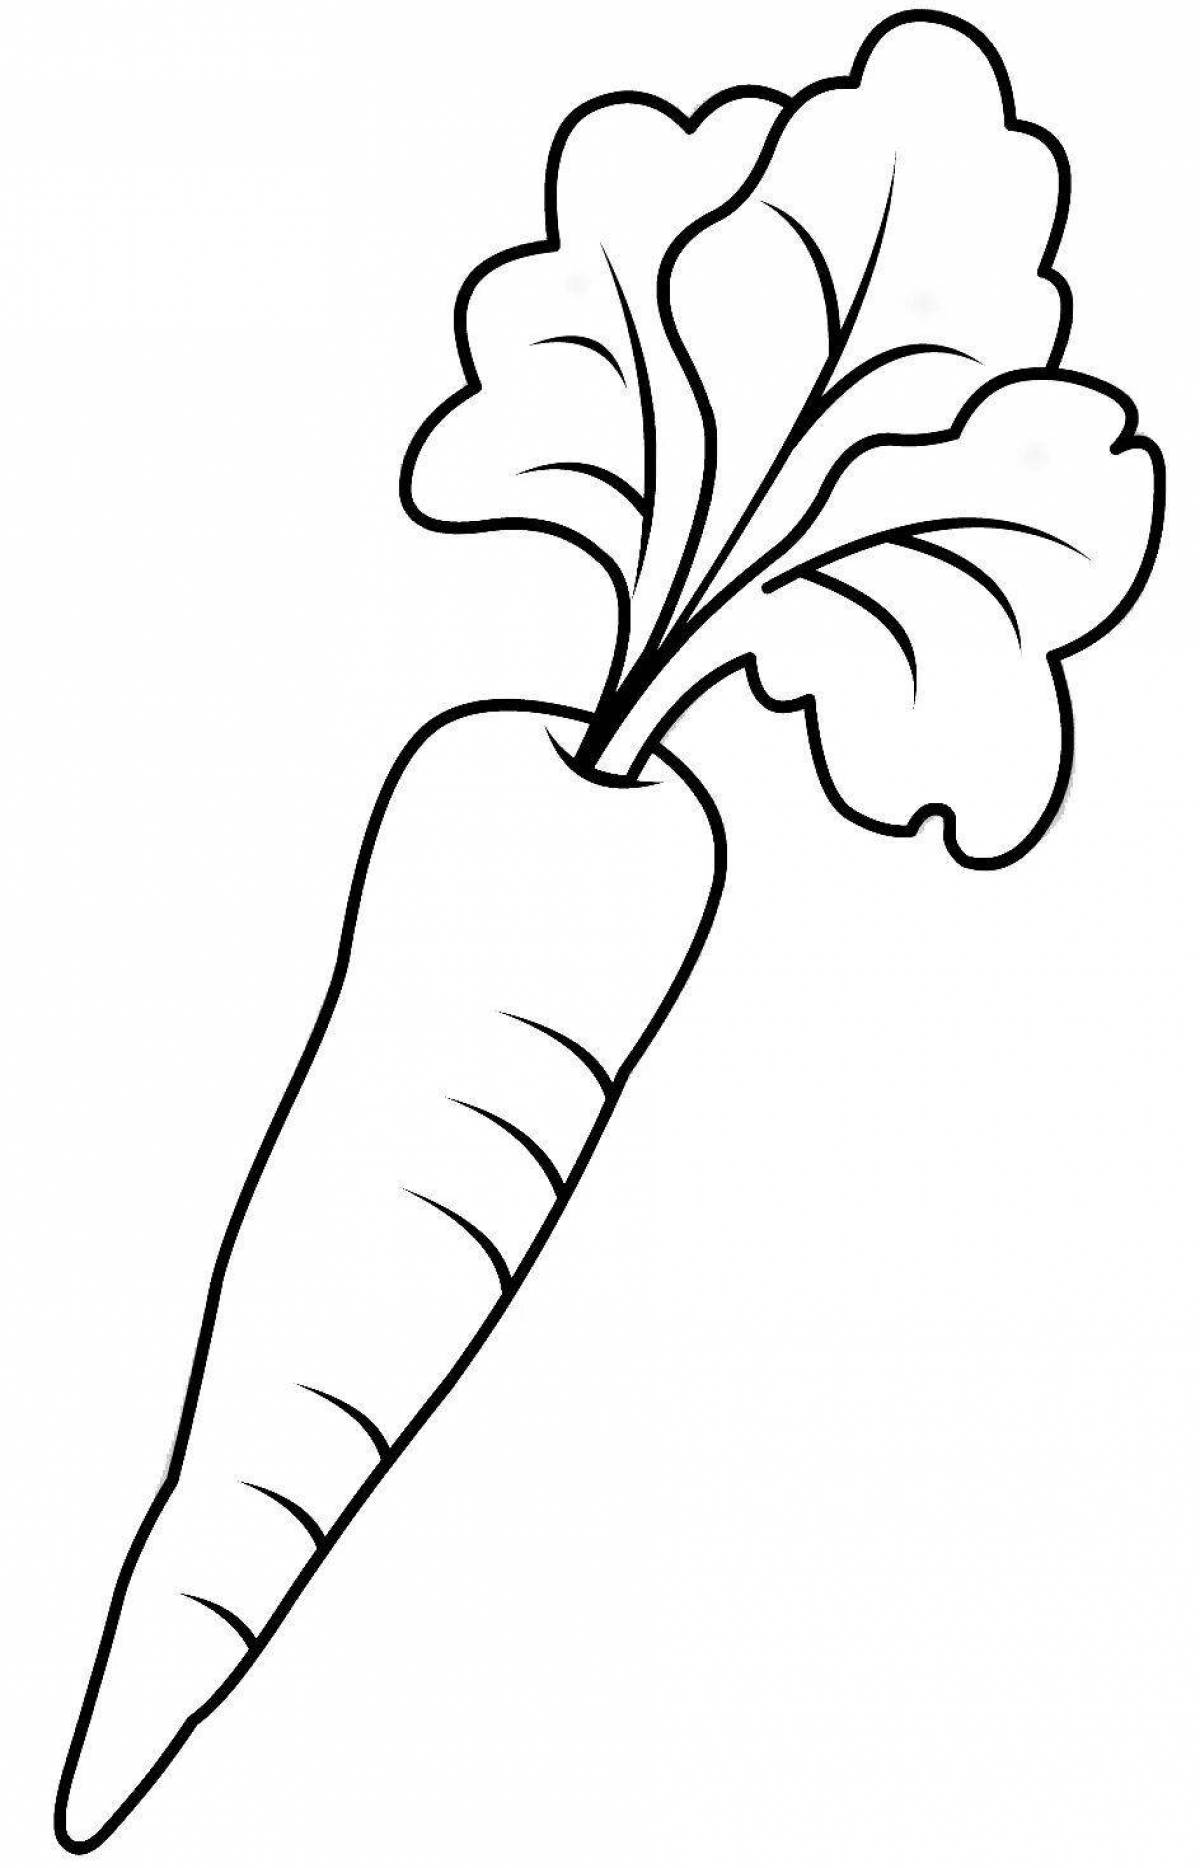 Funny carrot coloring for bunny 2 junior group